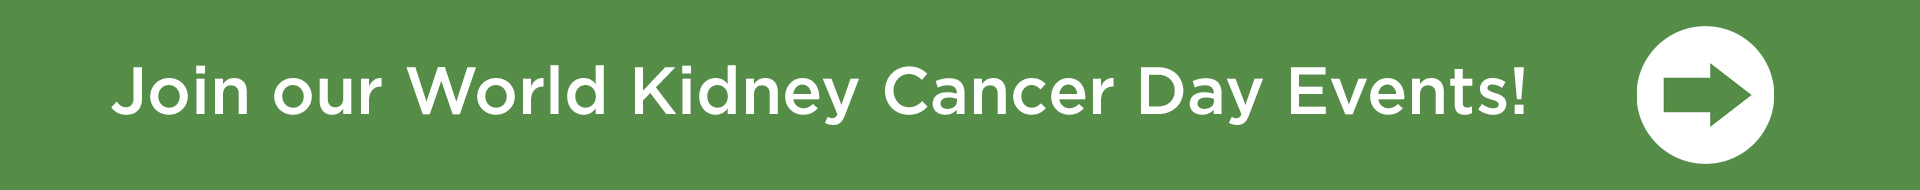 World Kidney Cancer Day 2020 events with Kidney Cancer Canada